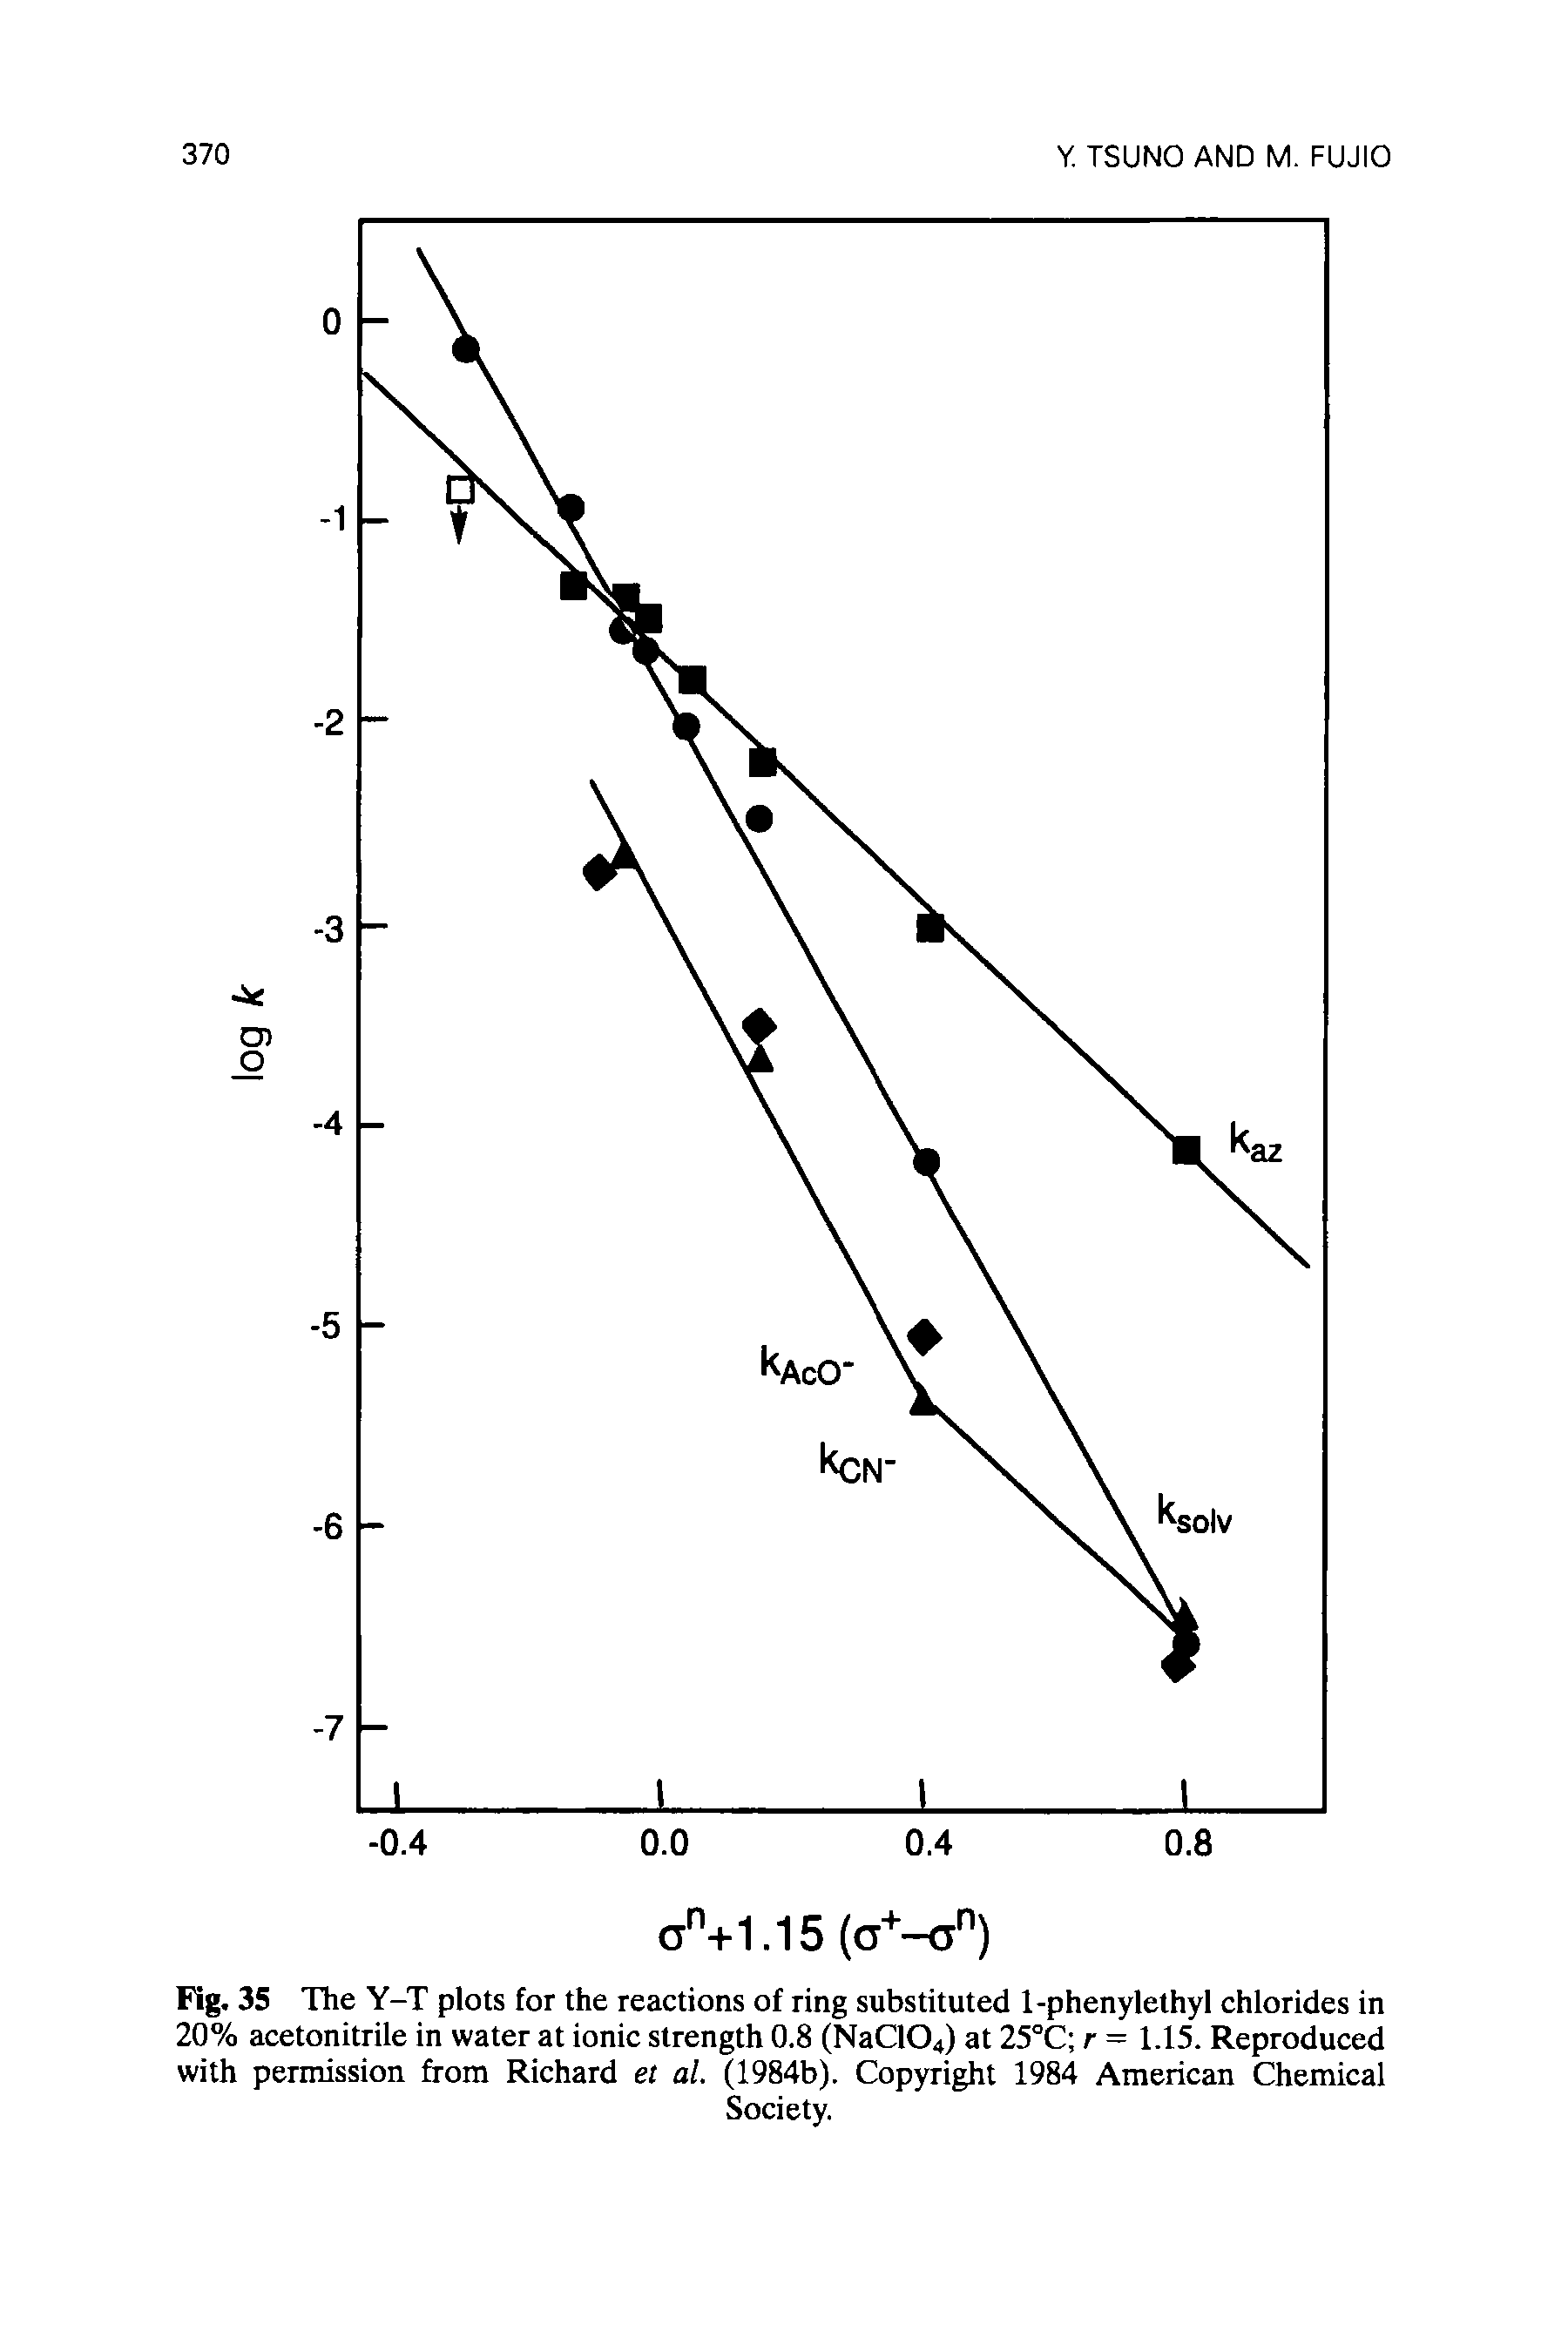 Fig. 35 The Y-T plots for the reactions of ring substituted 1-phenylethyl chlorides in 20% acetonitrile in water at ionic strength 0.8 (NaC104) at 25°C r = 1.15. Reproduced with permission from Richard et al. (1984b). Copyright 1984 American Chemical...